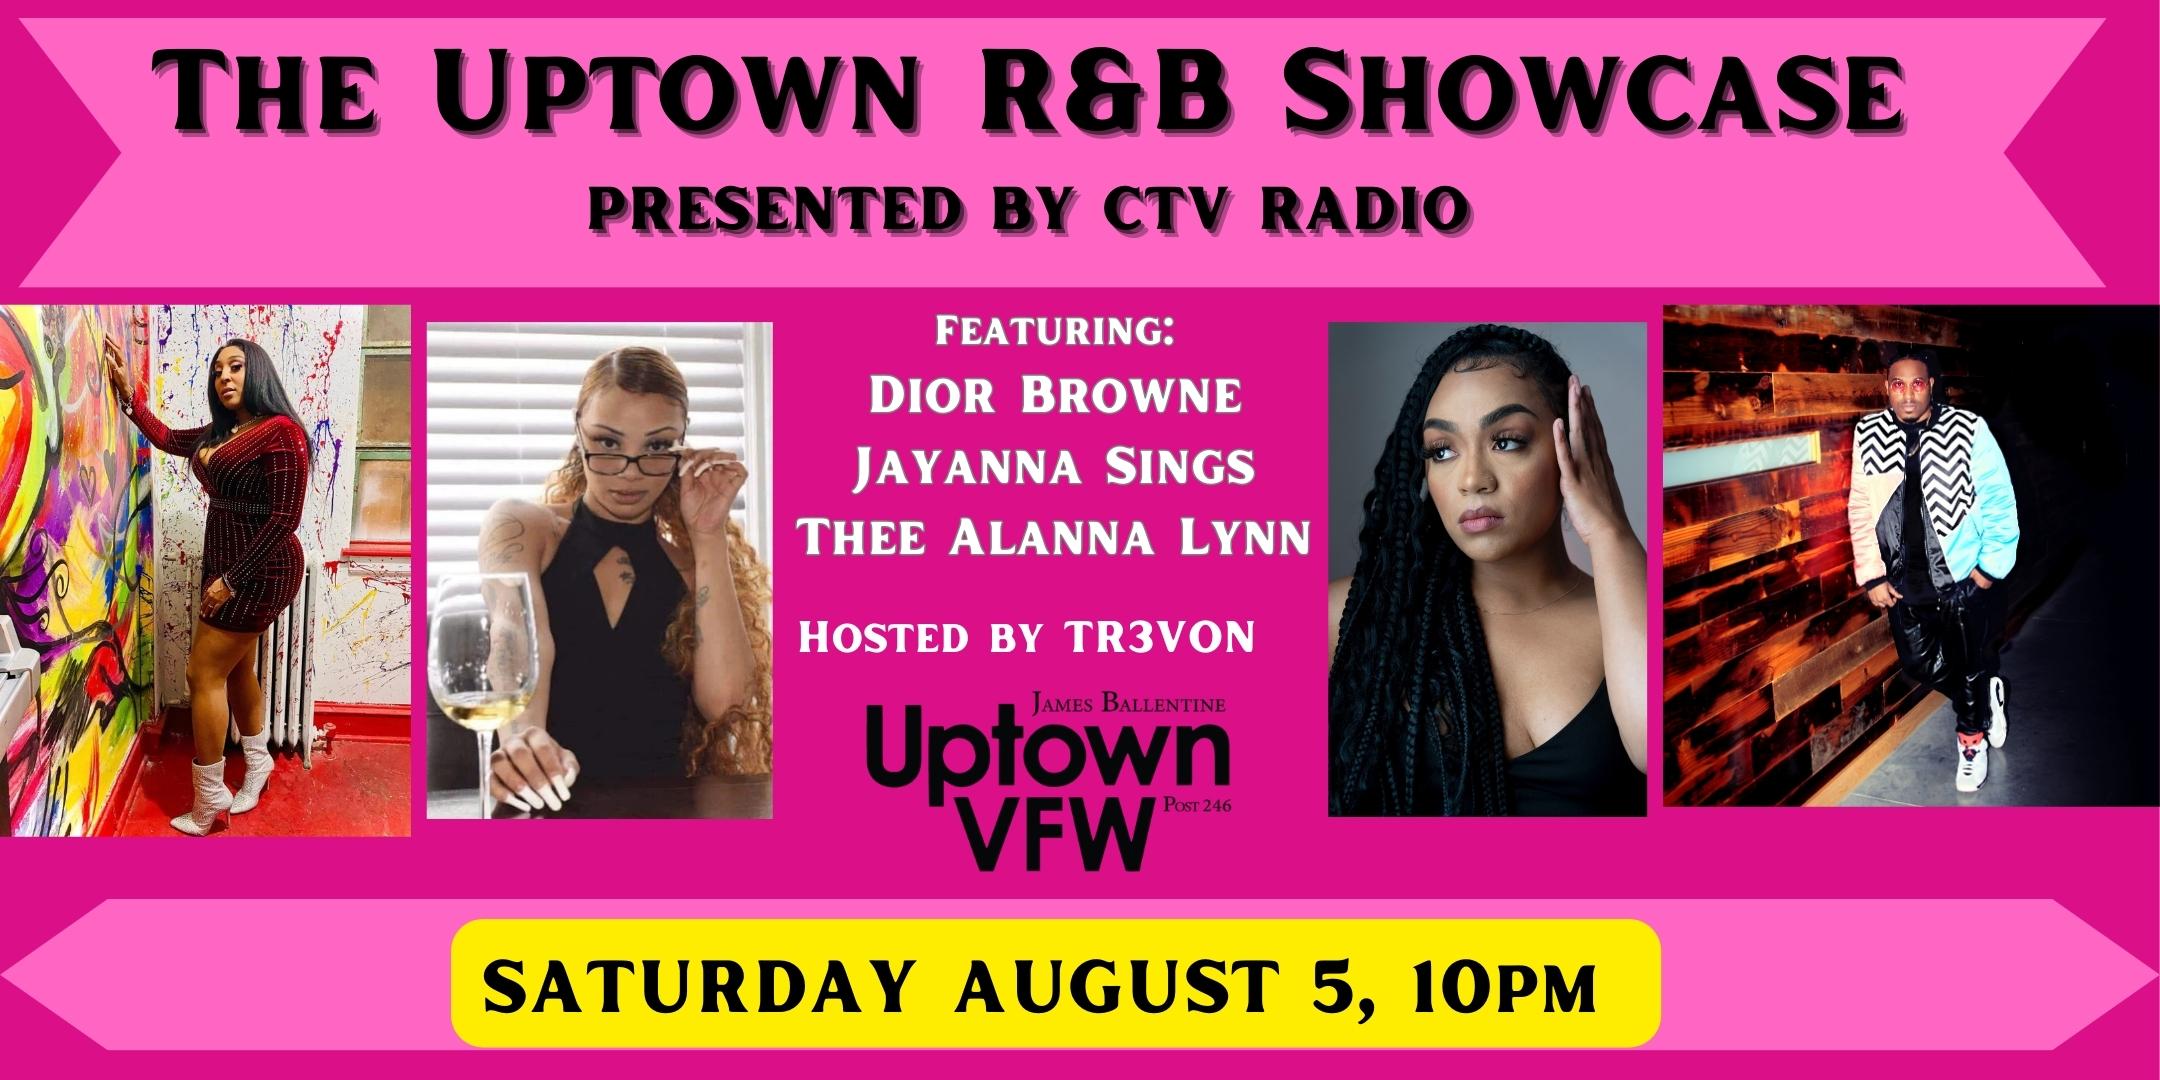 The Uptown R&B Showcase PRESENTED BY CTV RADIO Featuring: Dior Browne Jayanna Sings Thee Alanna Lynn Hosted by TR3VON Saturday, August 5 James Ballentine "Uptown" VFW Post 246 Doors 10:00pm :: Music 11:00pm :: 21+ GA $7 ADV / $12 DOS Tickets On-Sale Now